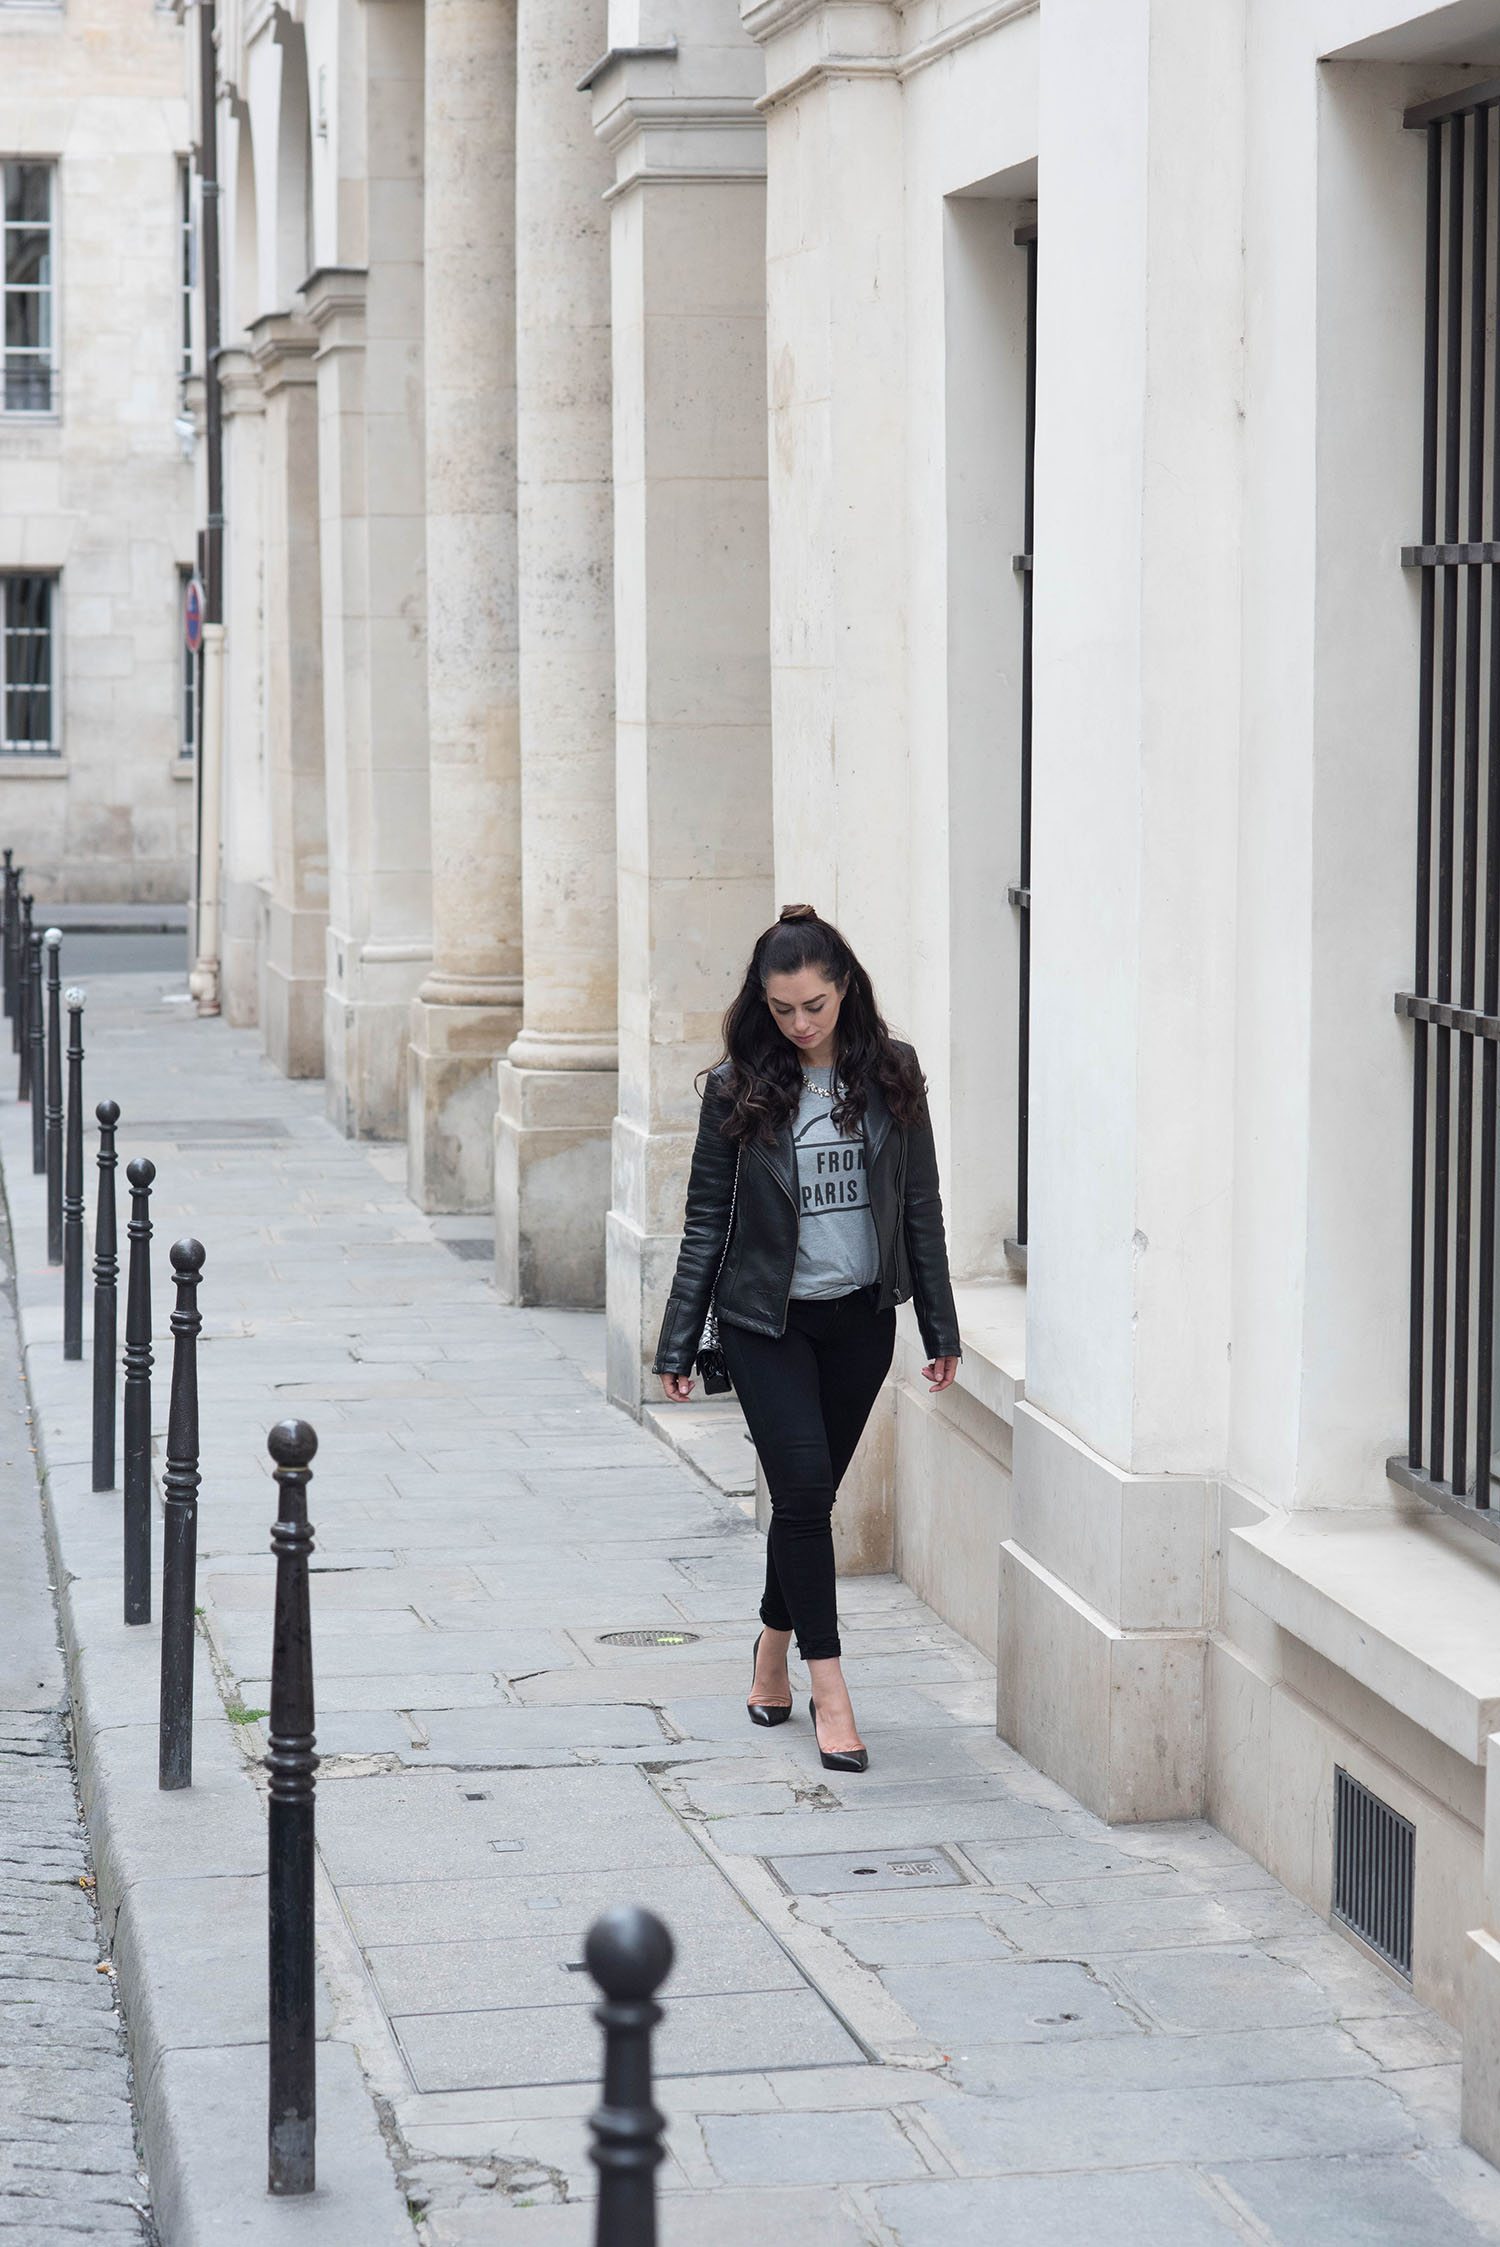 Canadian fashion blogger Cee Fardoe of Coco & Vera walks outside the Palais Royal wearing Paige jeans and Christian Louboutin Pigalle pumps